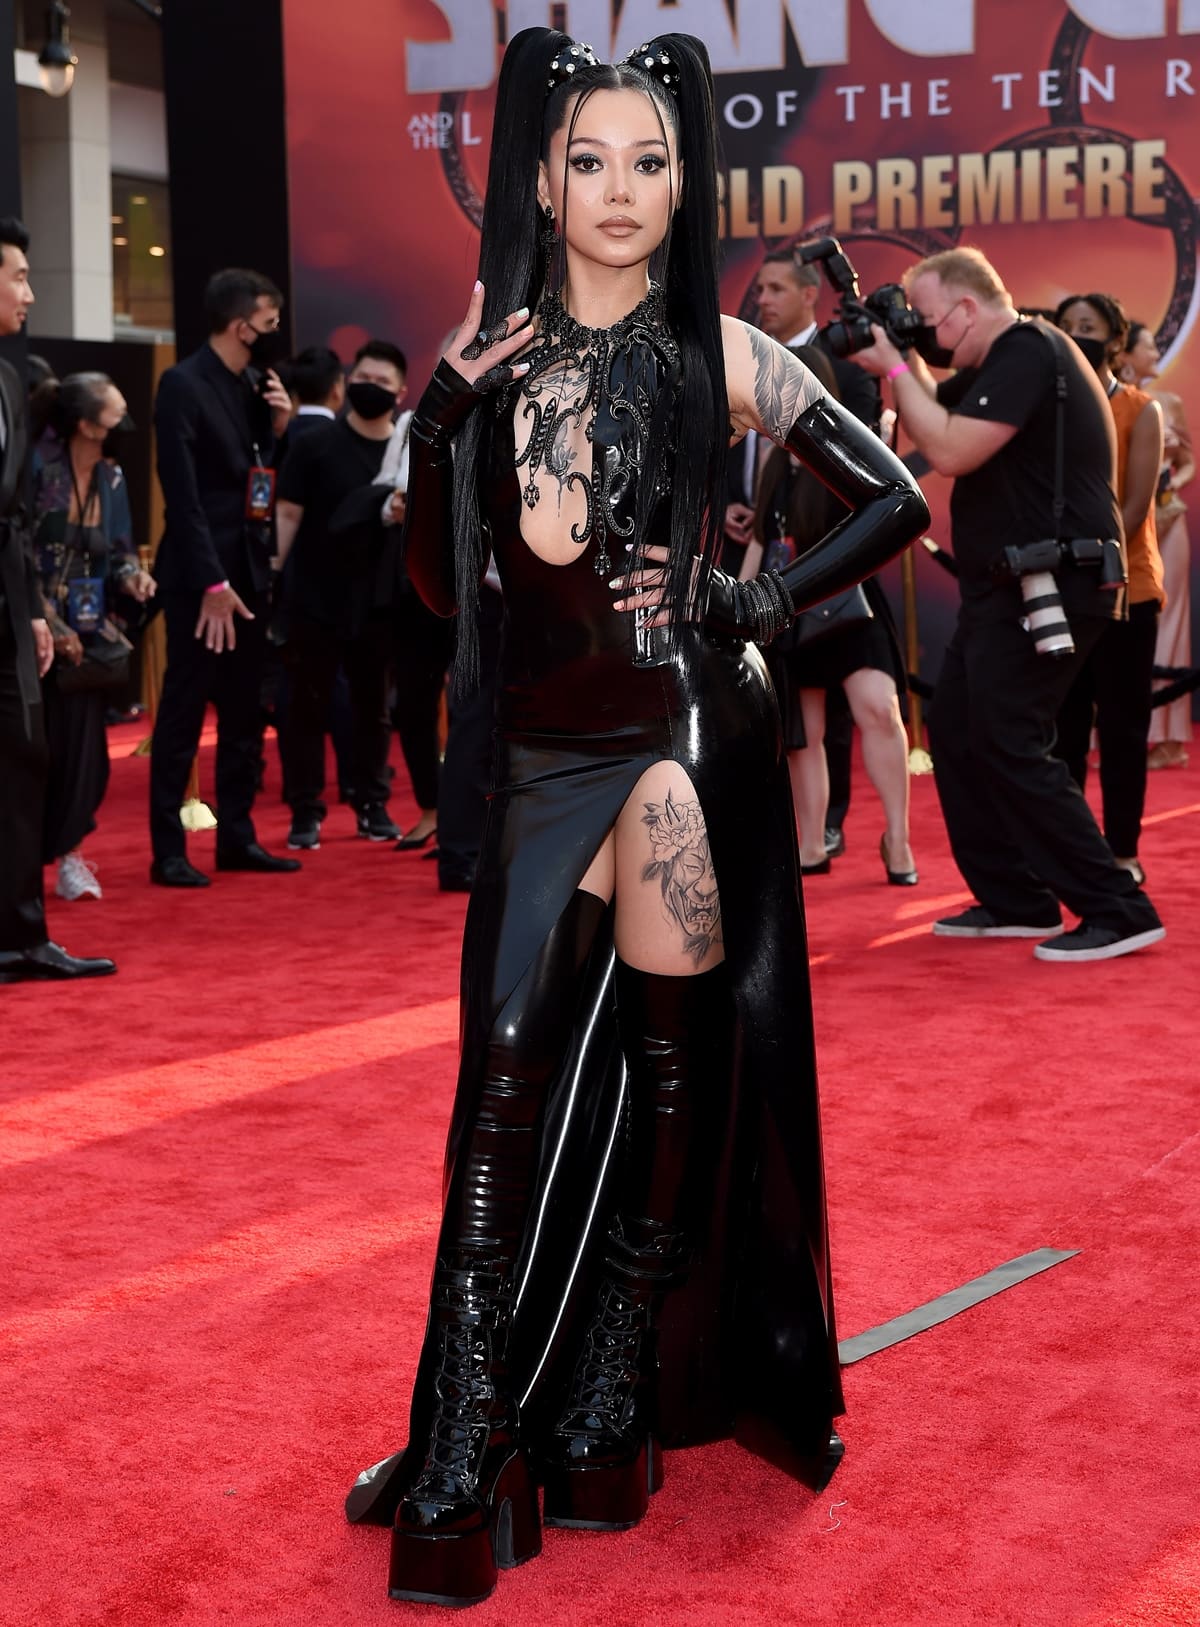 Bella Poarch made her red carpet debut at the "Shang-Chi and the Legend of the Ten Rings" World Premiere